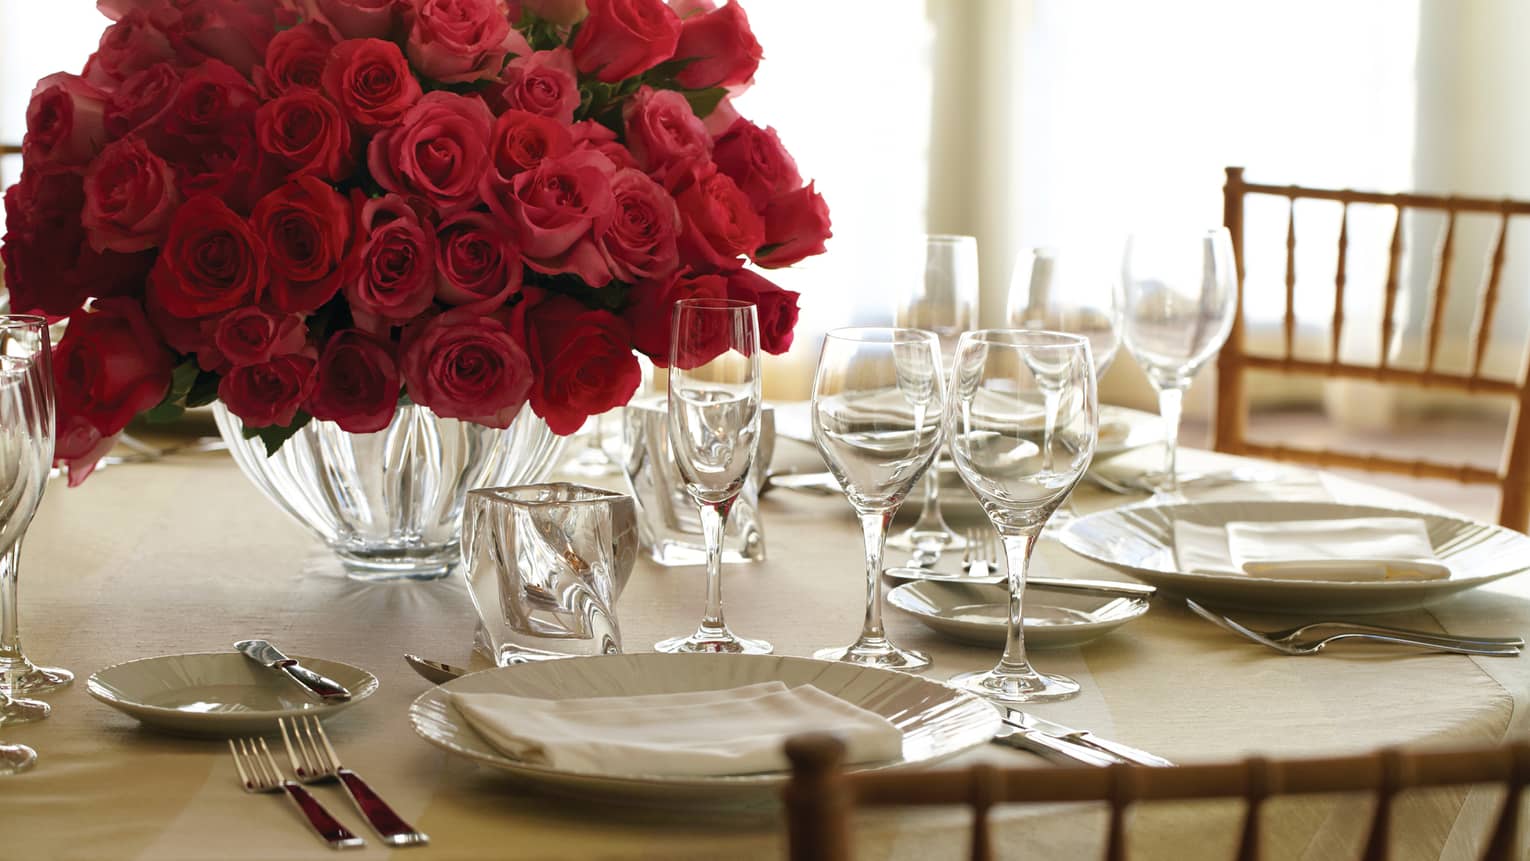 Banquet dining table place setting with plate, crystal glasses and vase with red rose bouquet